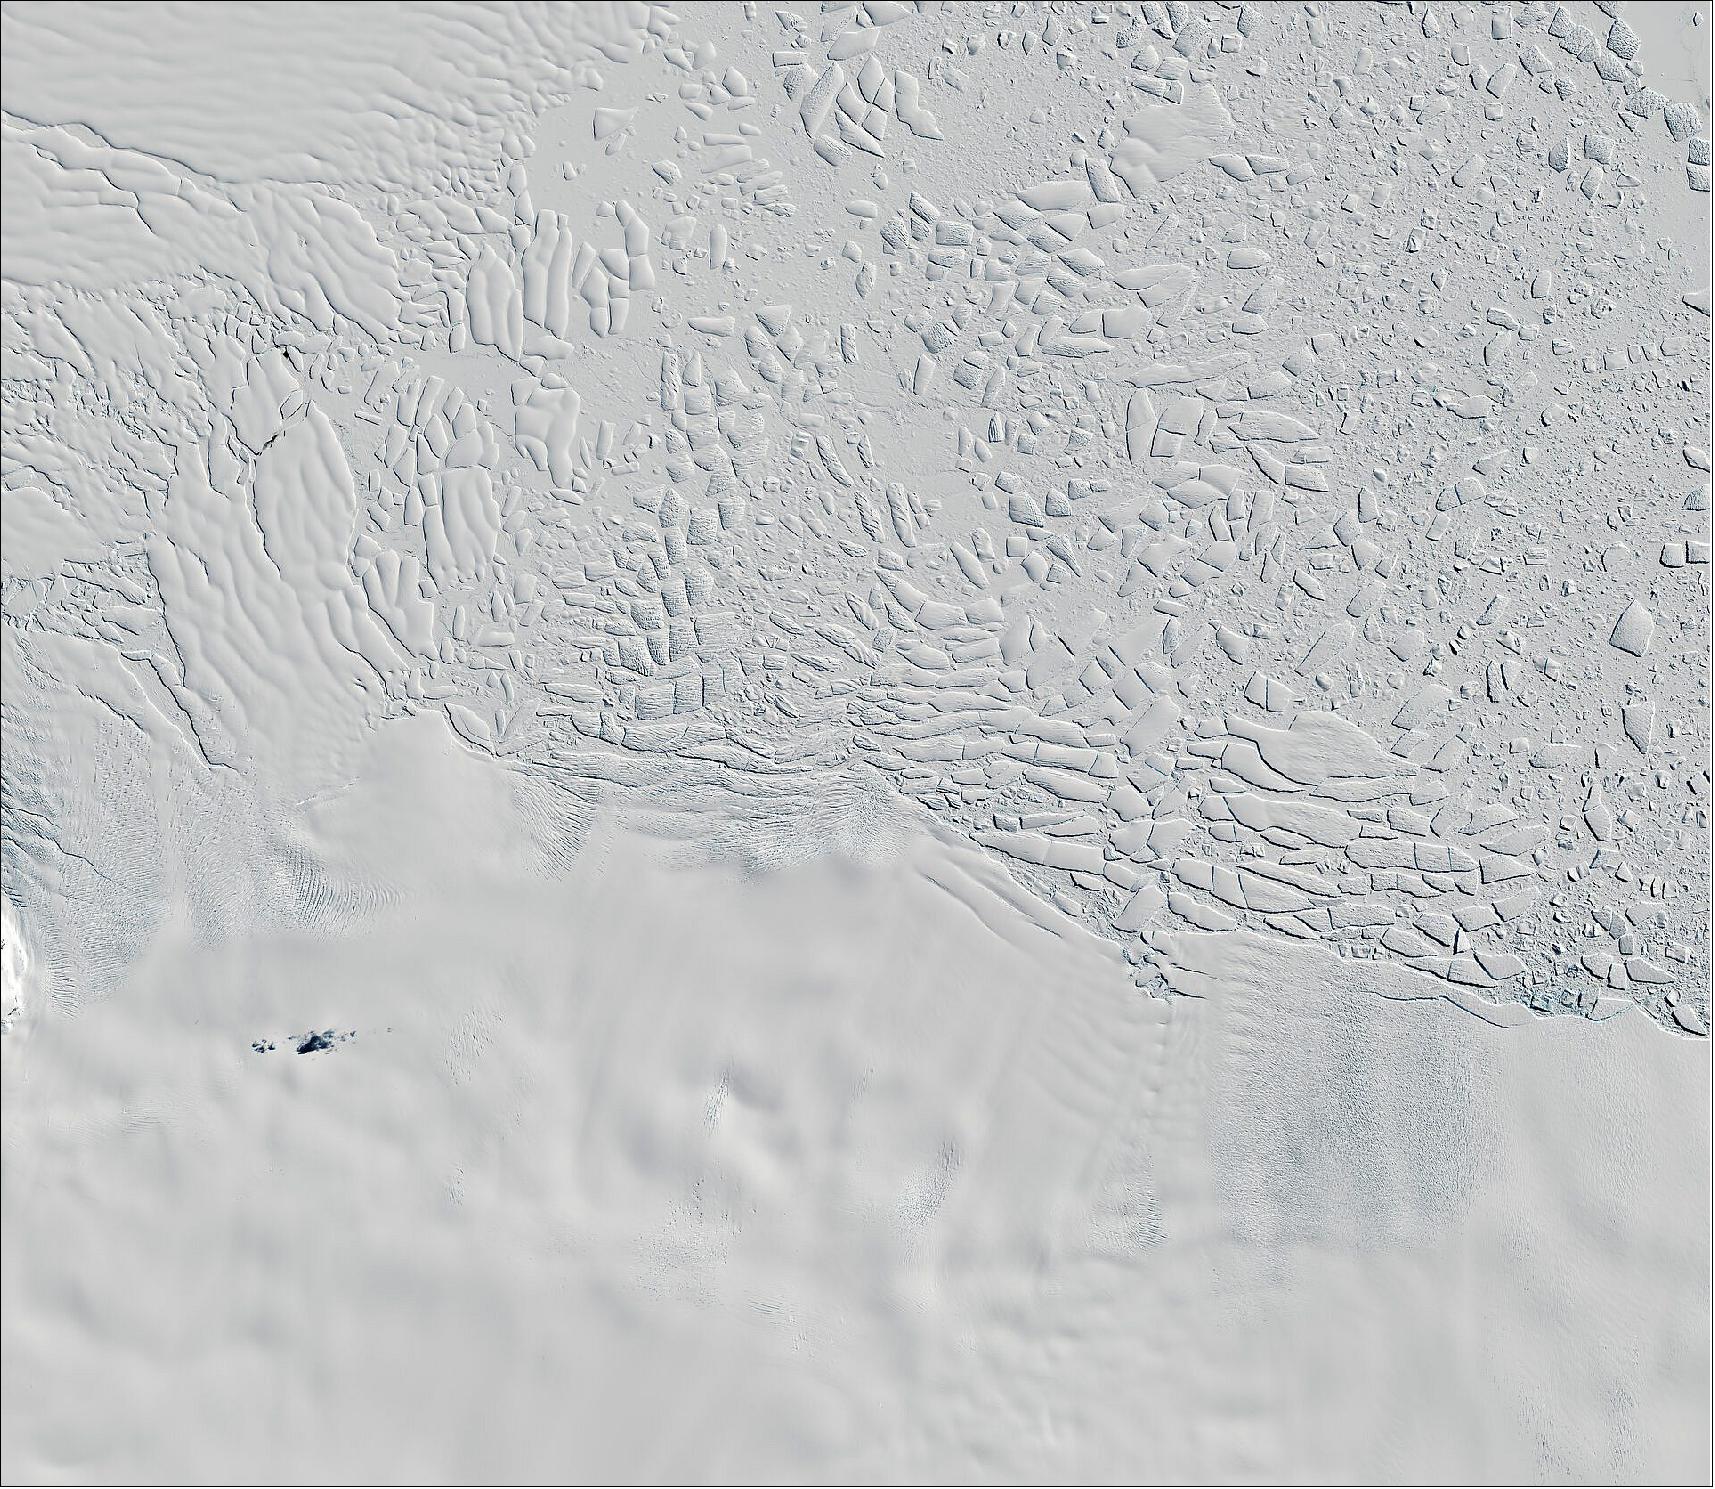 Figure 22: Thwaites glacier seen by Copernicus Sentinel-2. At around 120 km wide, Thwaites is the largest glacier on Earth and one of the most fragile glaciers in Antarctica. Imaged here by Copernicus Sentinel-2 on 26 November 2020, it's hard to imagine what's going on deep below the ice. Hidden from view by ice kilometers thick, there is a vast network of lakes and streams at the base of the Antarctic ice sheet. Using more than 10 years' worth of altimetry data from ESA's CryoSat satellite, scientists discovered that the lakes beneath Thwaites, the largest of which is over 40 km long, drained in quick succession, in 2013 and then in 2017. This kind of drainage under Thwaites has never before been recorded. Scientists estimate that the rate of drainage peaked at about 500 m3 s-1 – possibly the largest outflow of meltwater ever reported from subglacial lakes in this region (image credit: ESA, the image contains modified Copernicus Sentinel data (2020), processed by ESA, CC BY-SA 3.0 IGO)